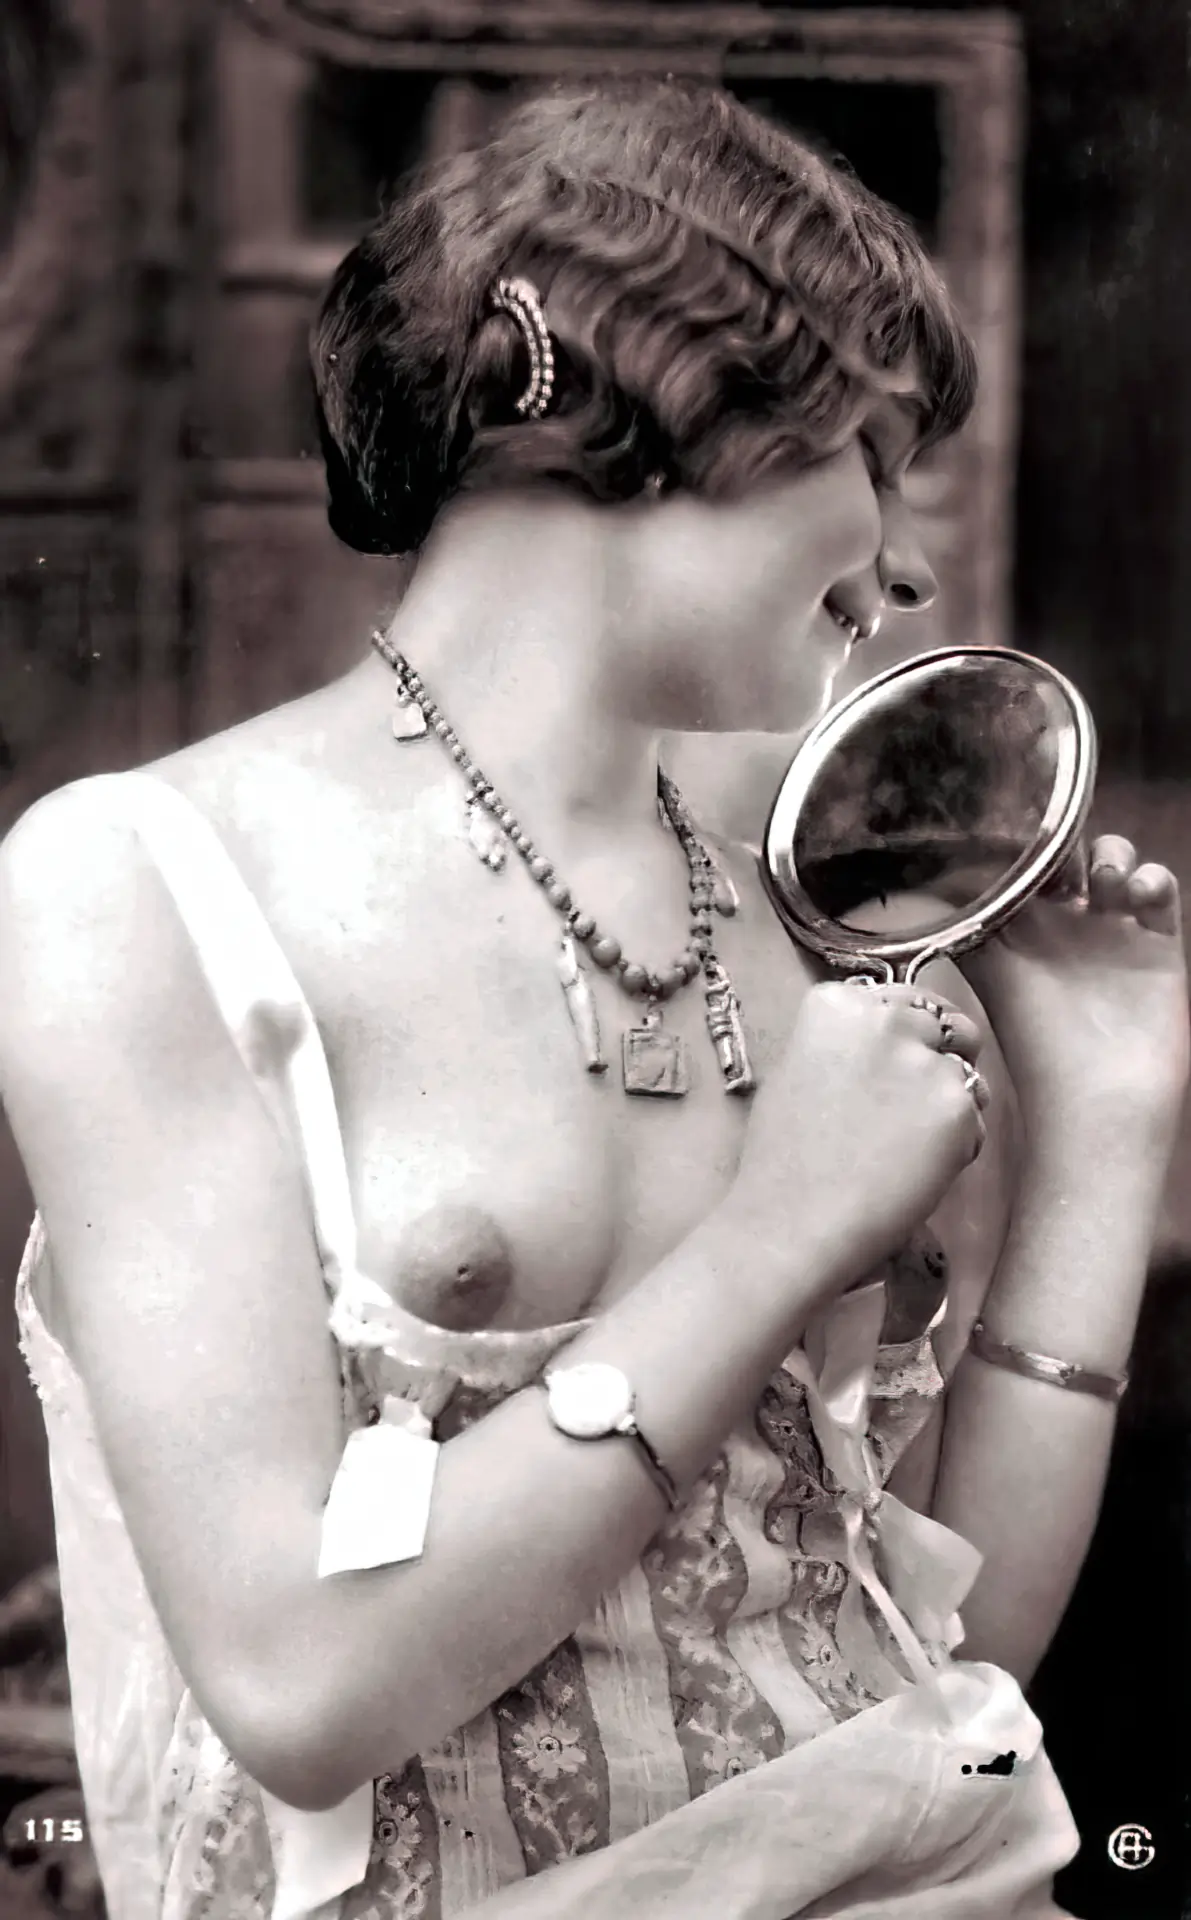 Vintage flat-chested teen with sensitive nipples looks into the mirror